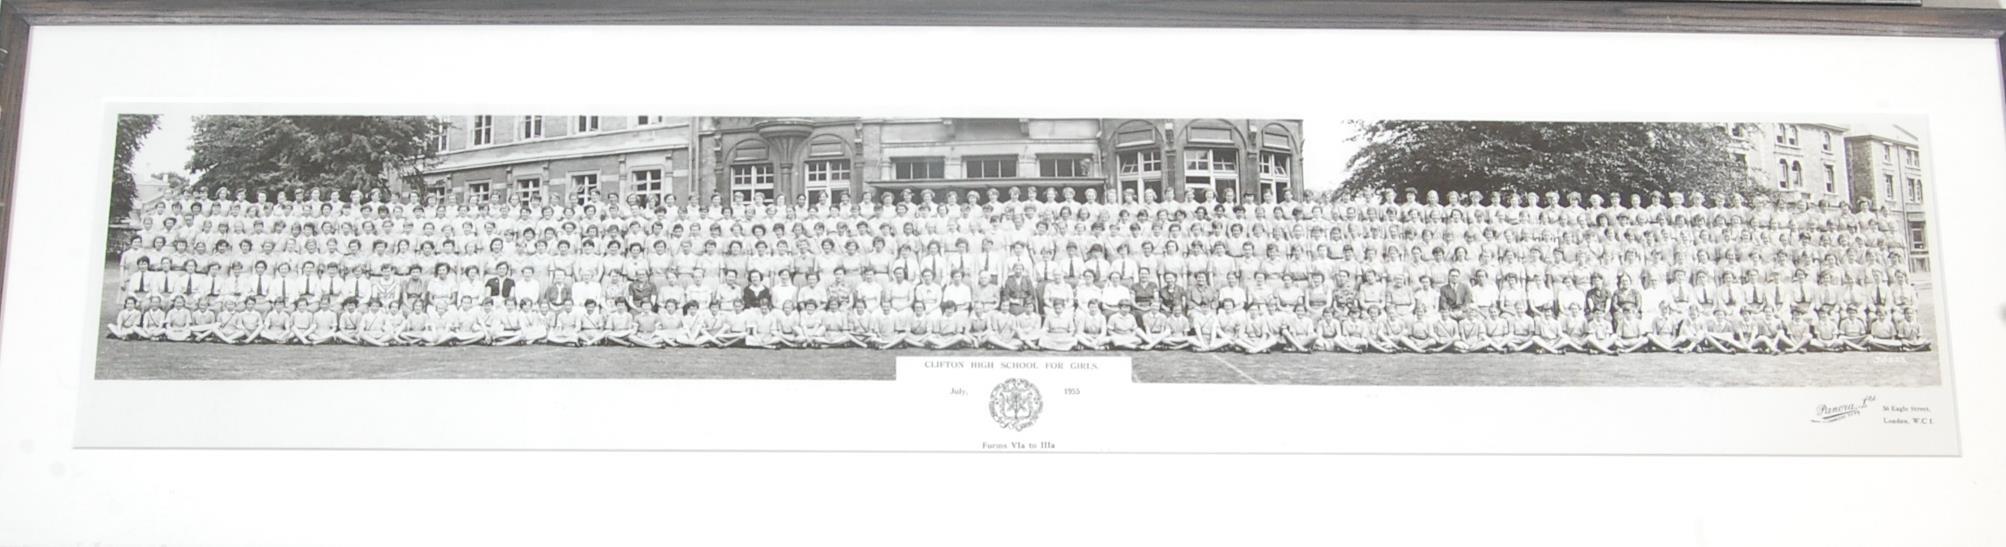 COOLECTION OF FOUR SCHOOL PHOTGRAPHS OF CLIFTON HIGH SCHOOL FOR GIRLS - Image 2 of 18